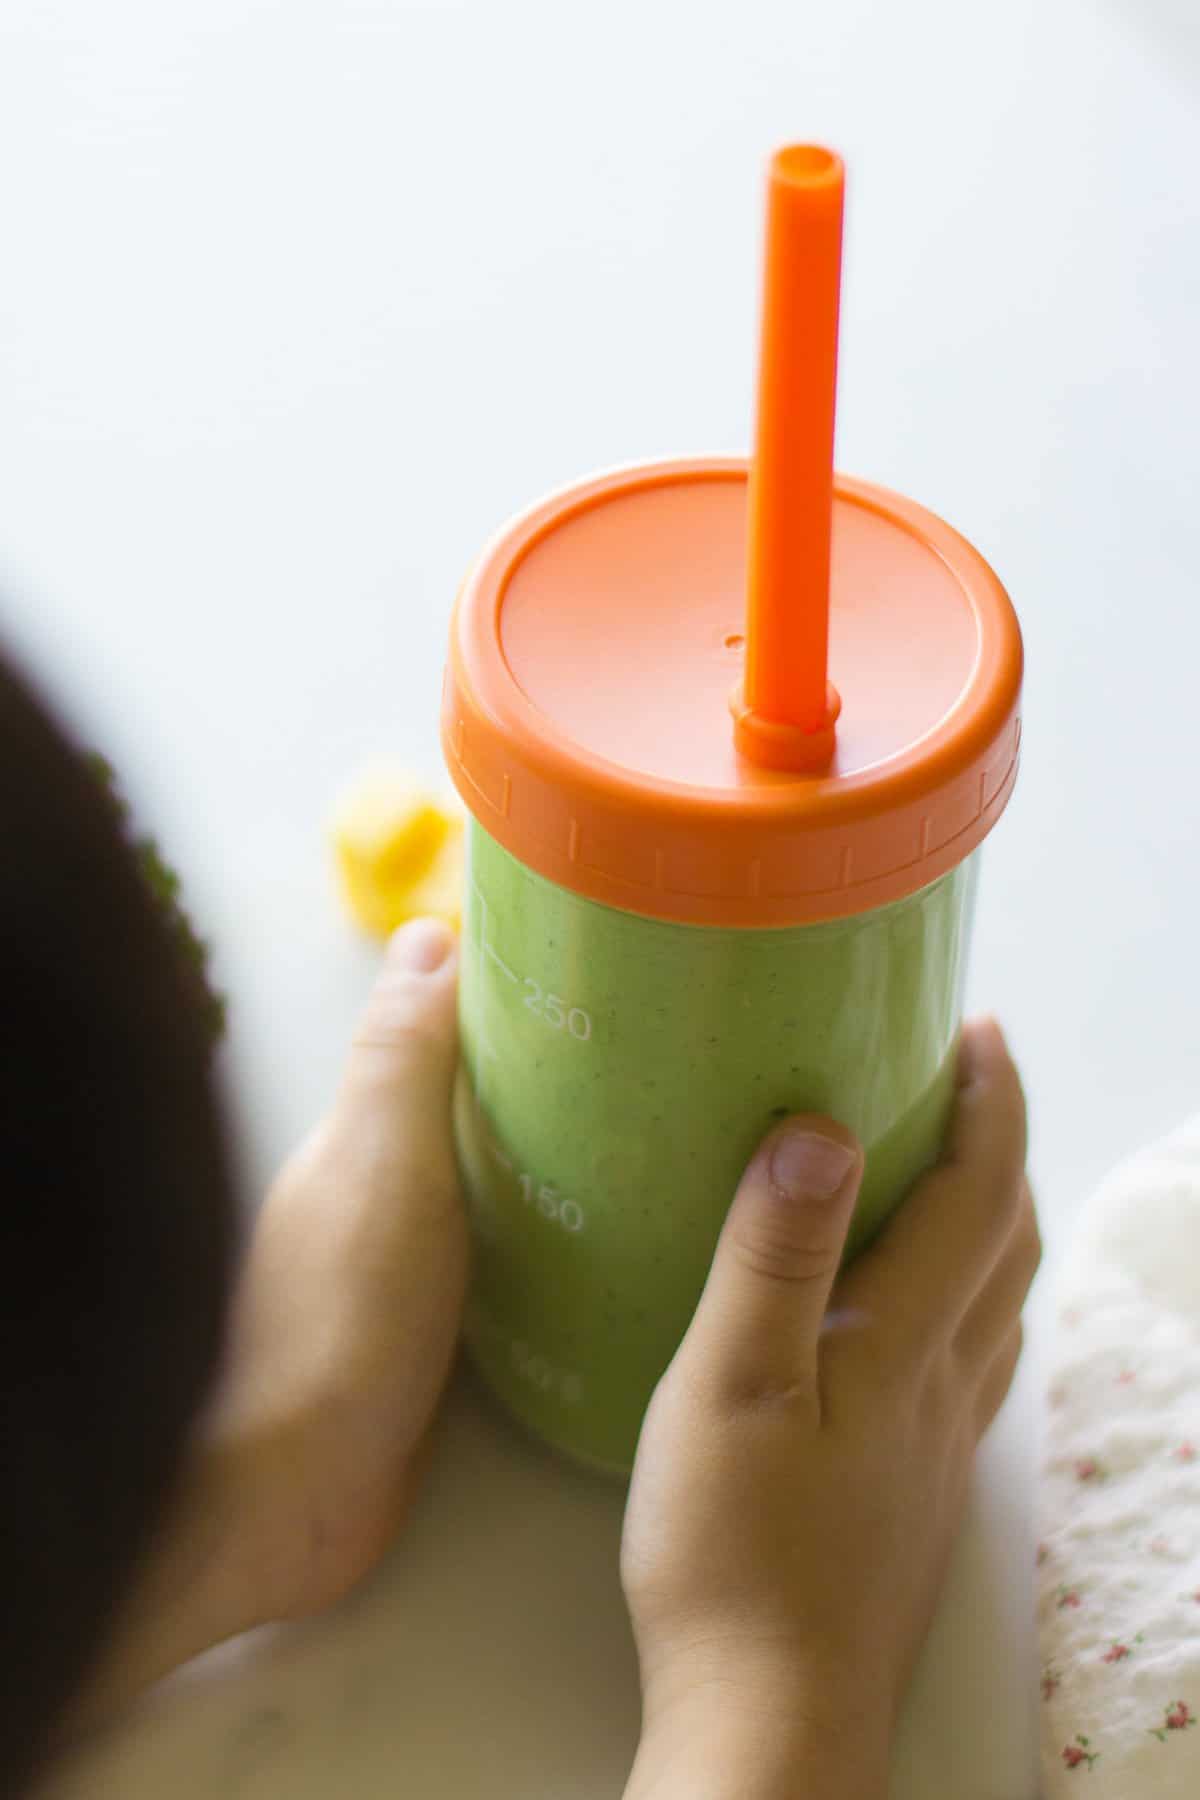 A toddler holding kale smoothie in a glass straw cup.